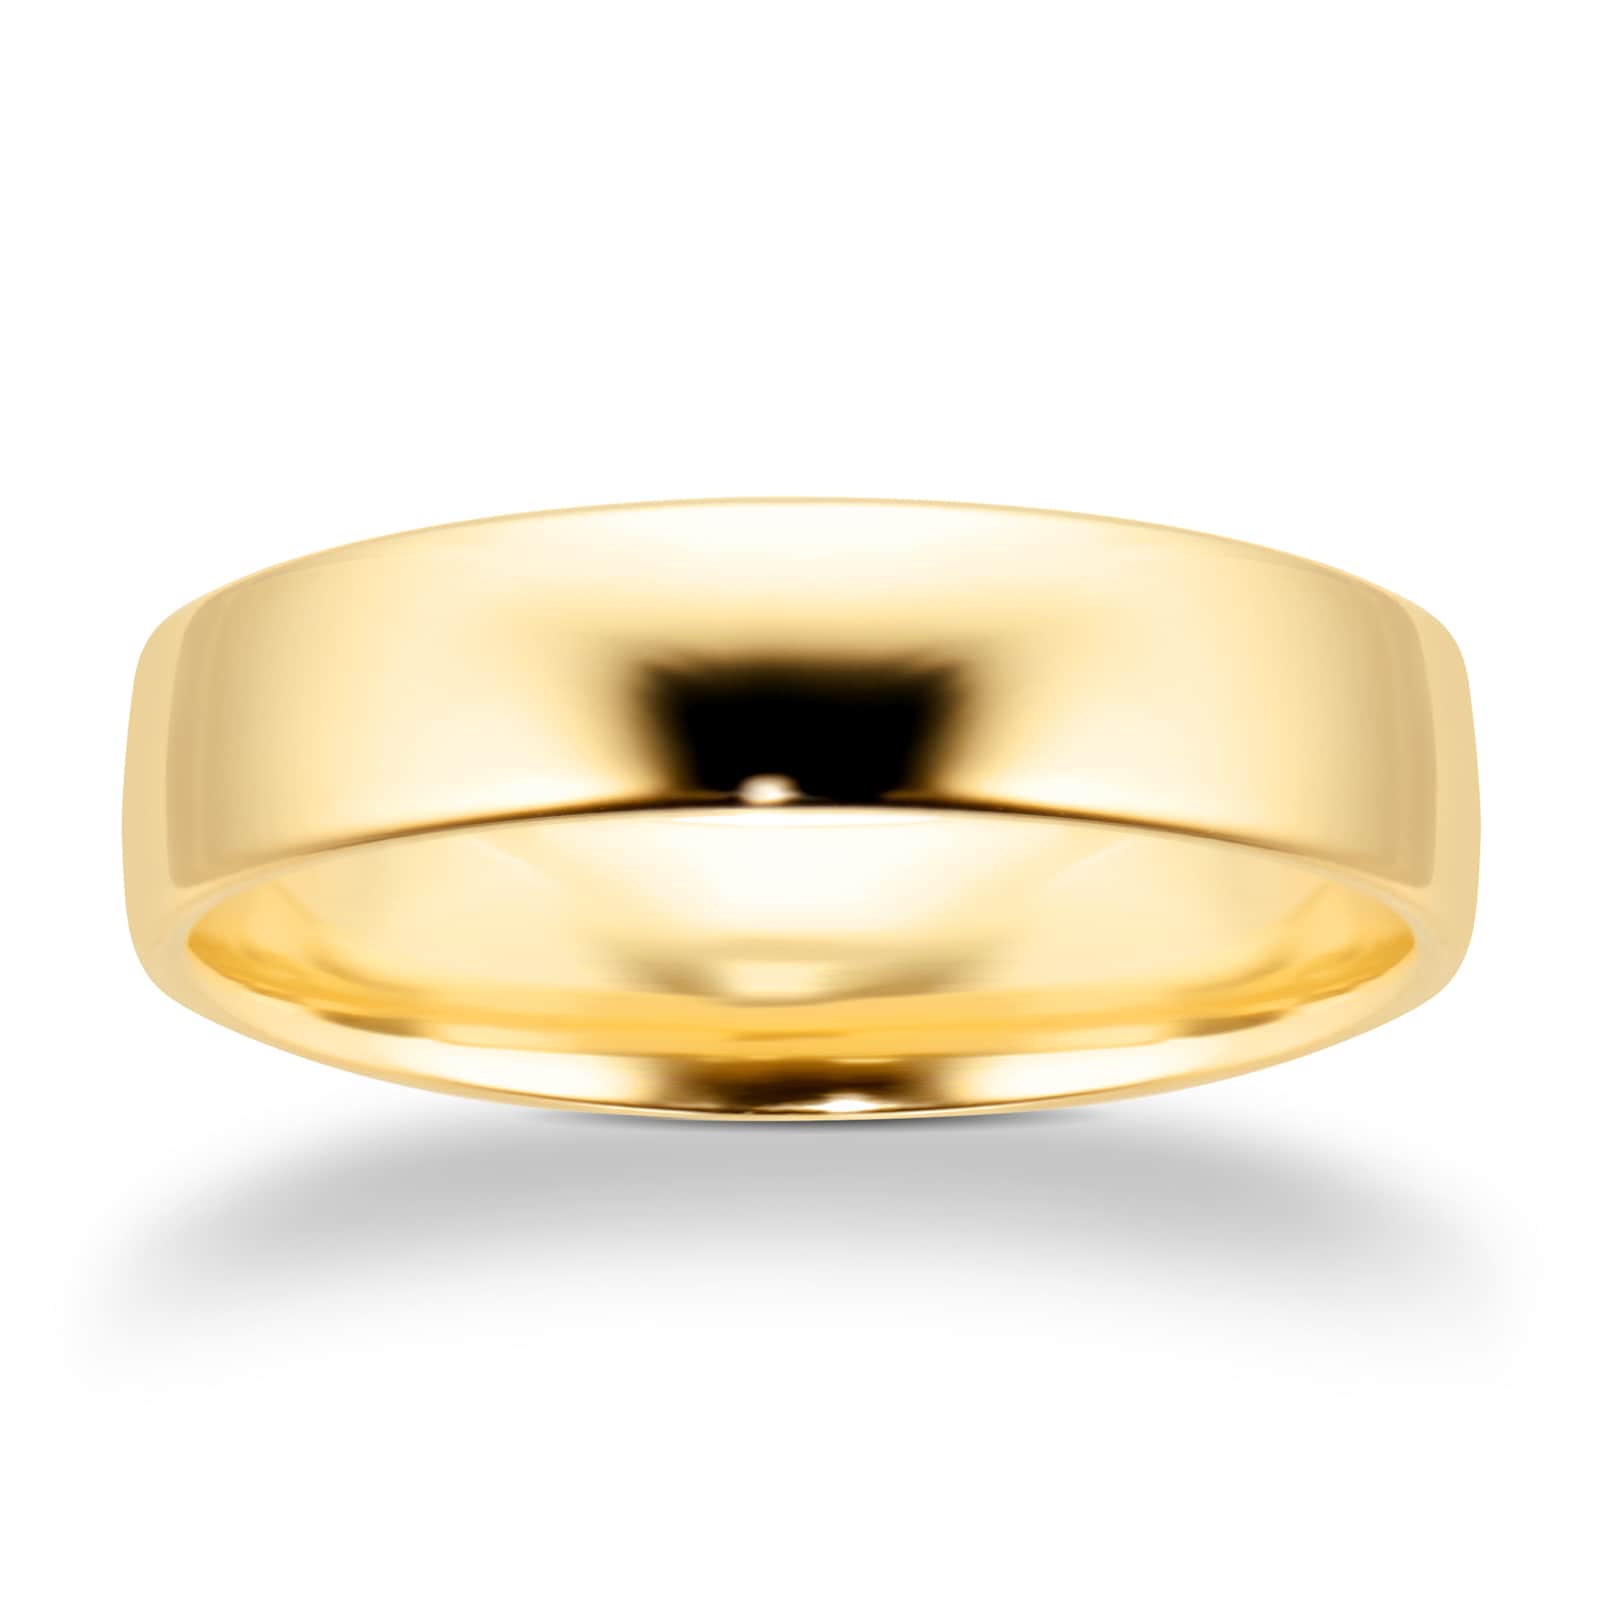 5mm Slight Court Standard Wedding Ring In 18 Carat Yellow Gold - Ring Size S